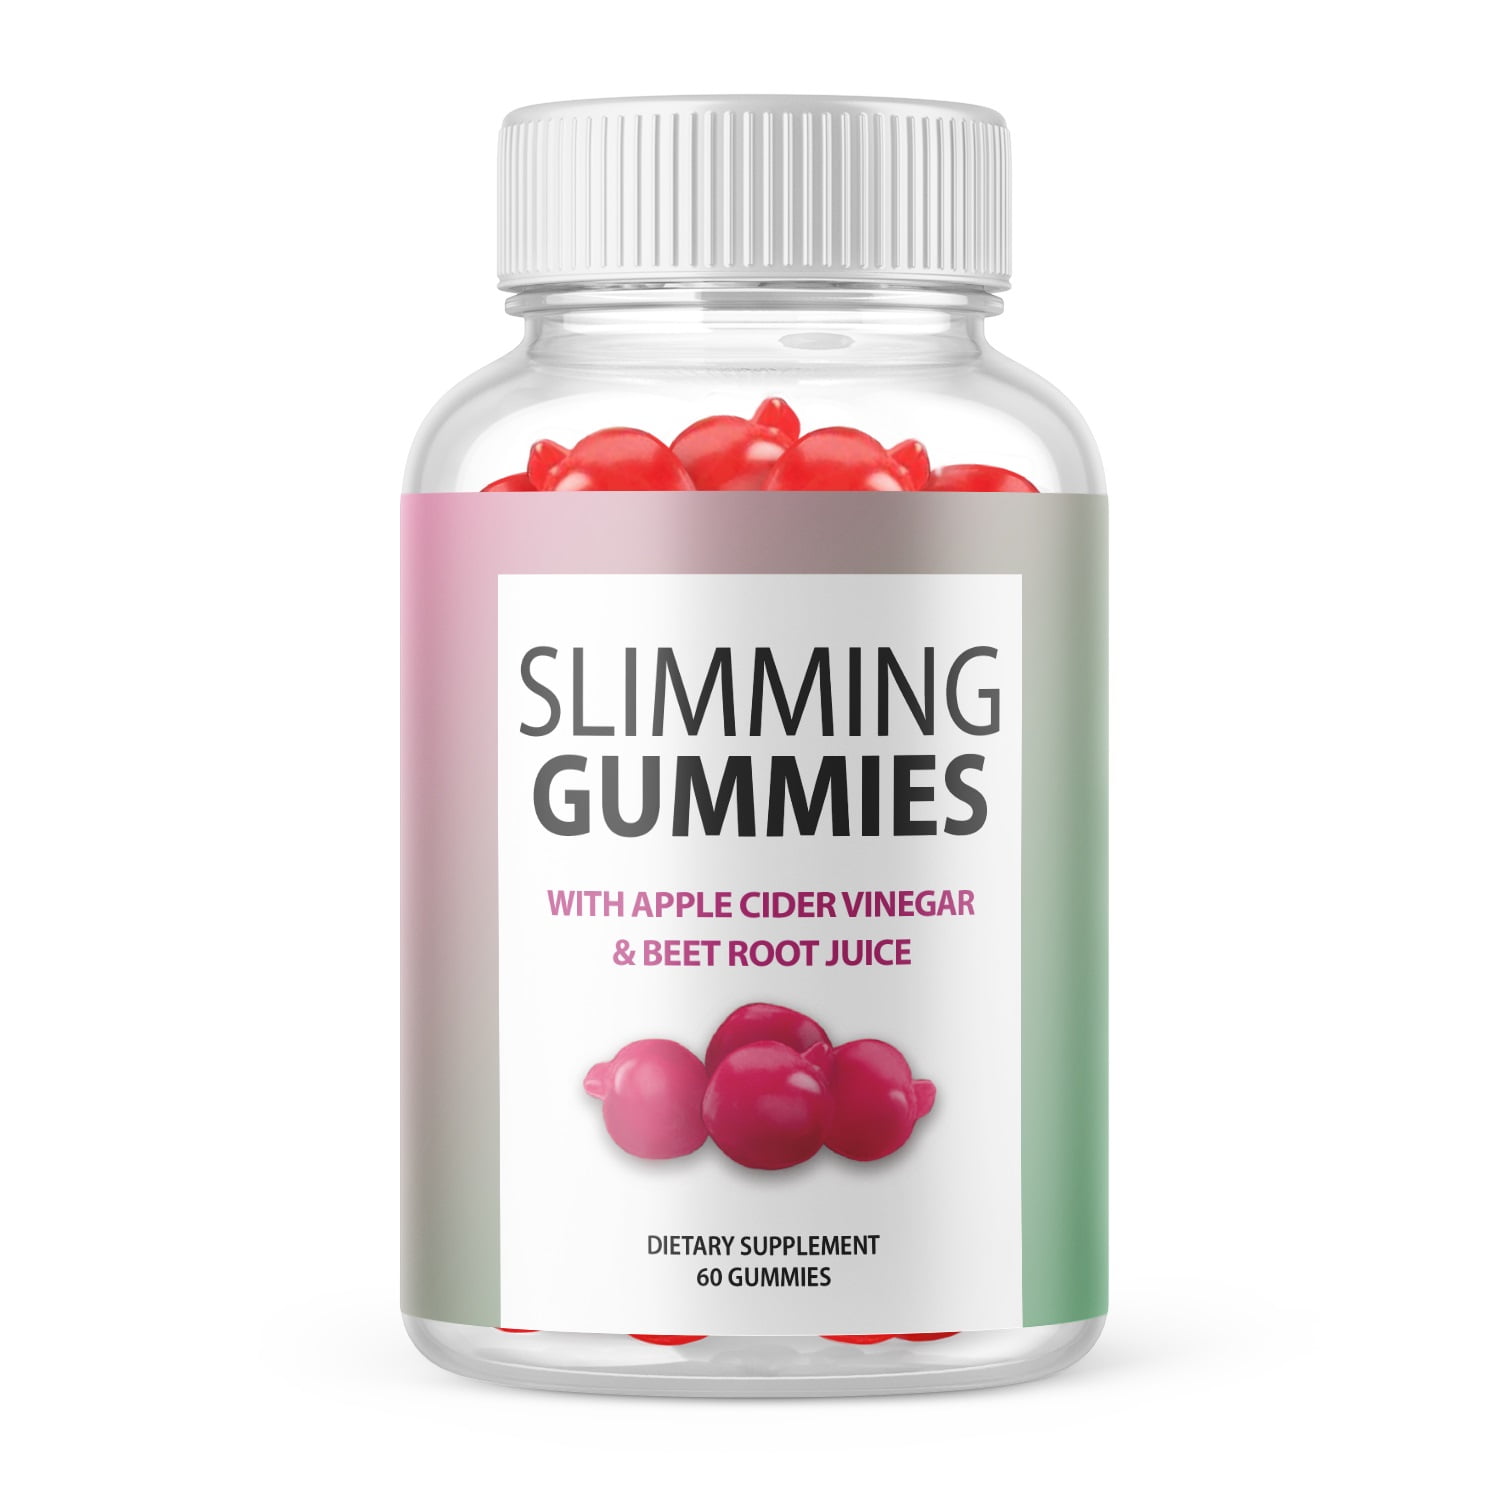 IT WORKS - What makes Slimming Gummies such a game changing